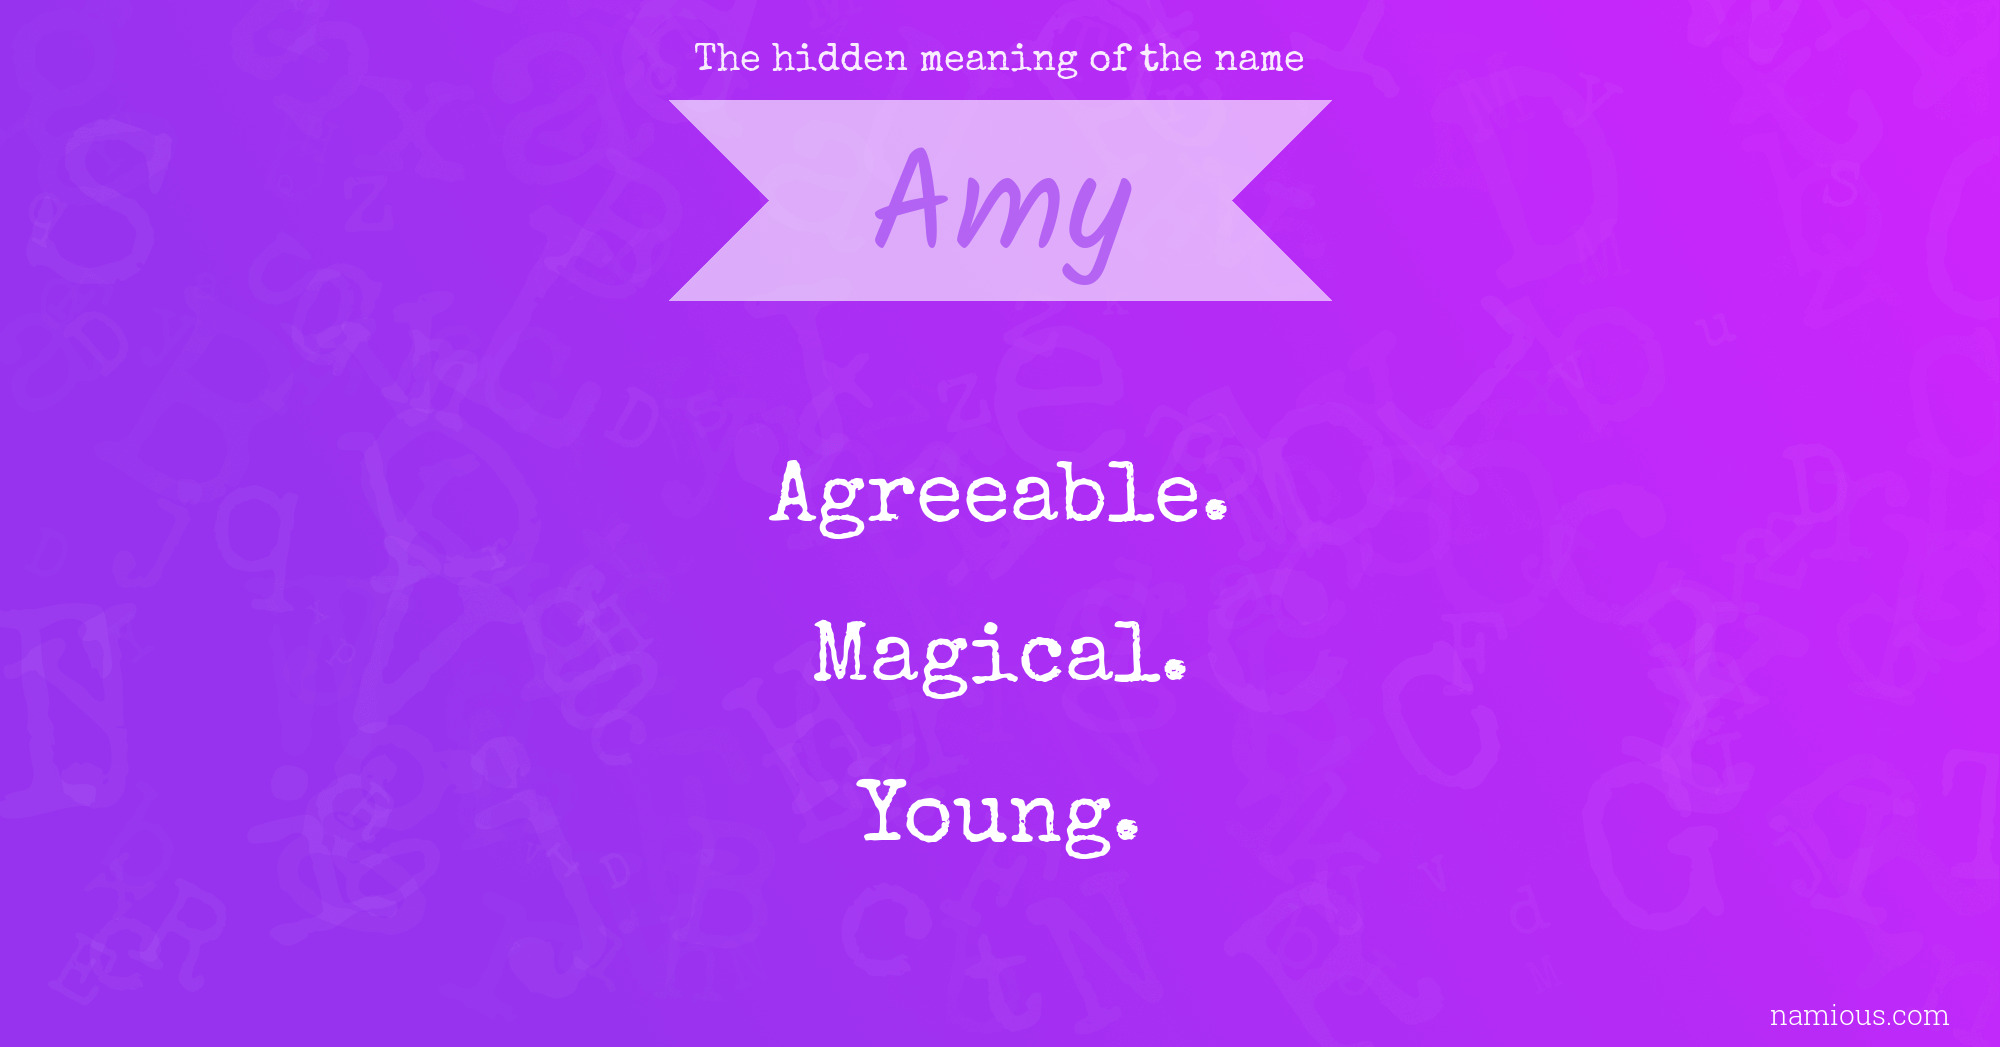 The hidden meaning of the name Amy